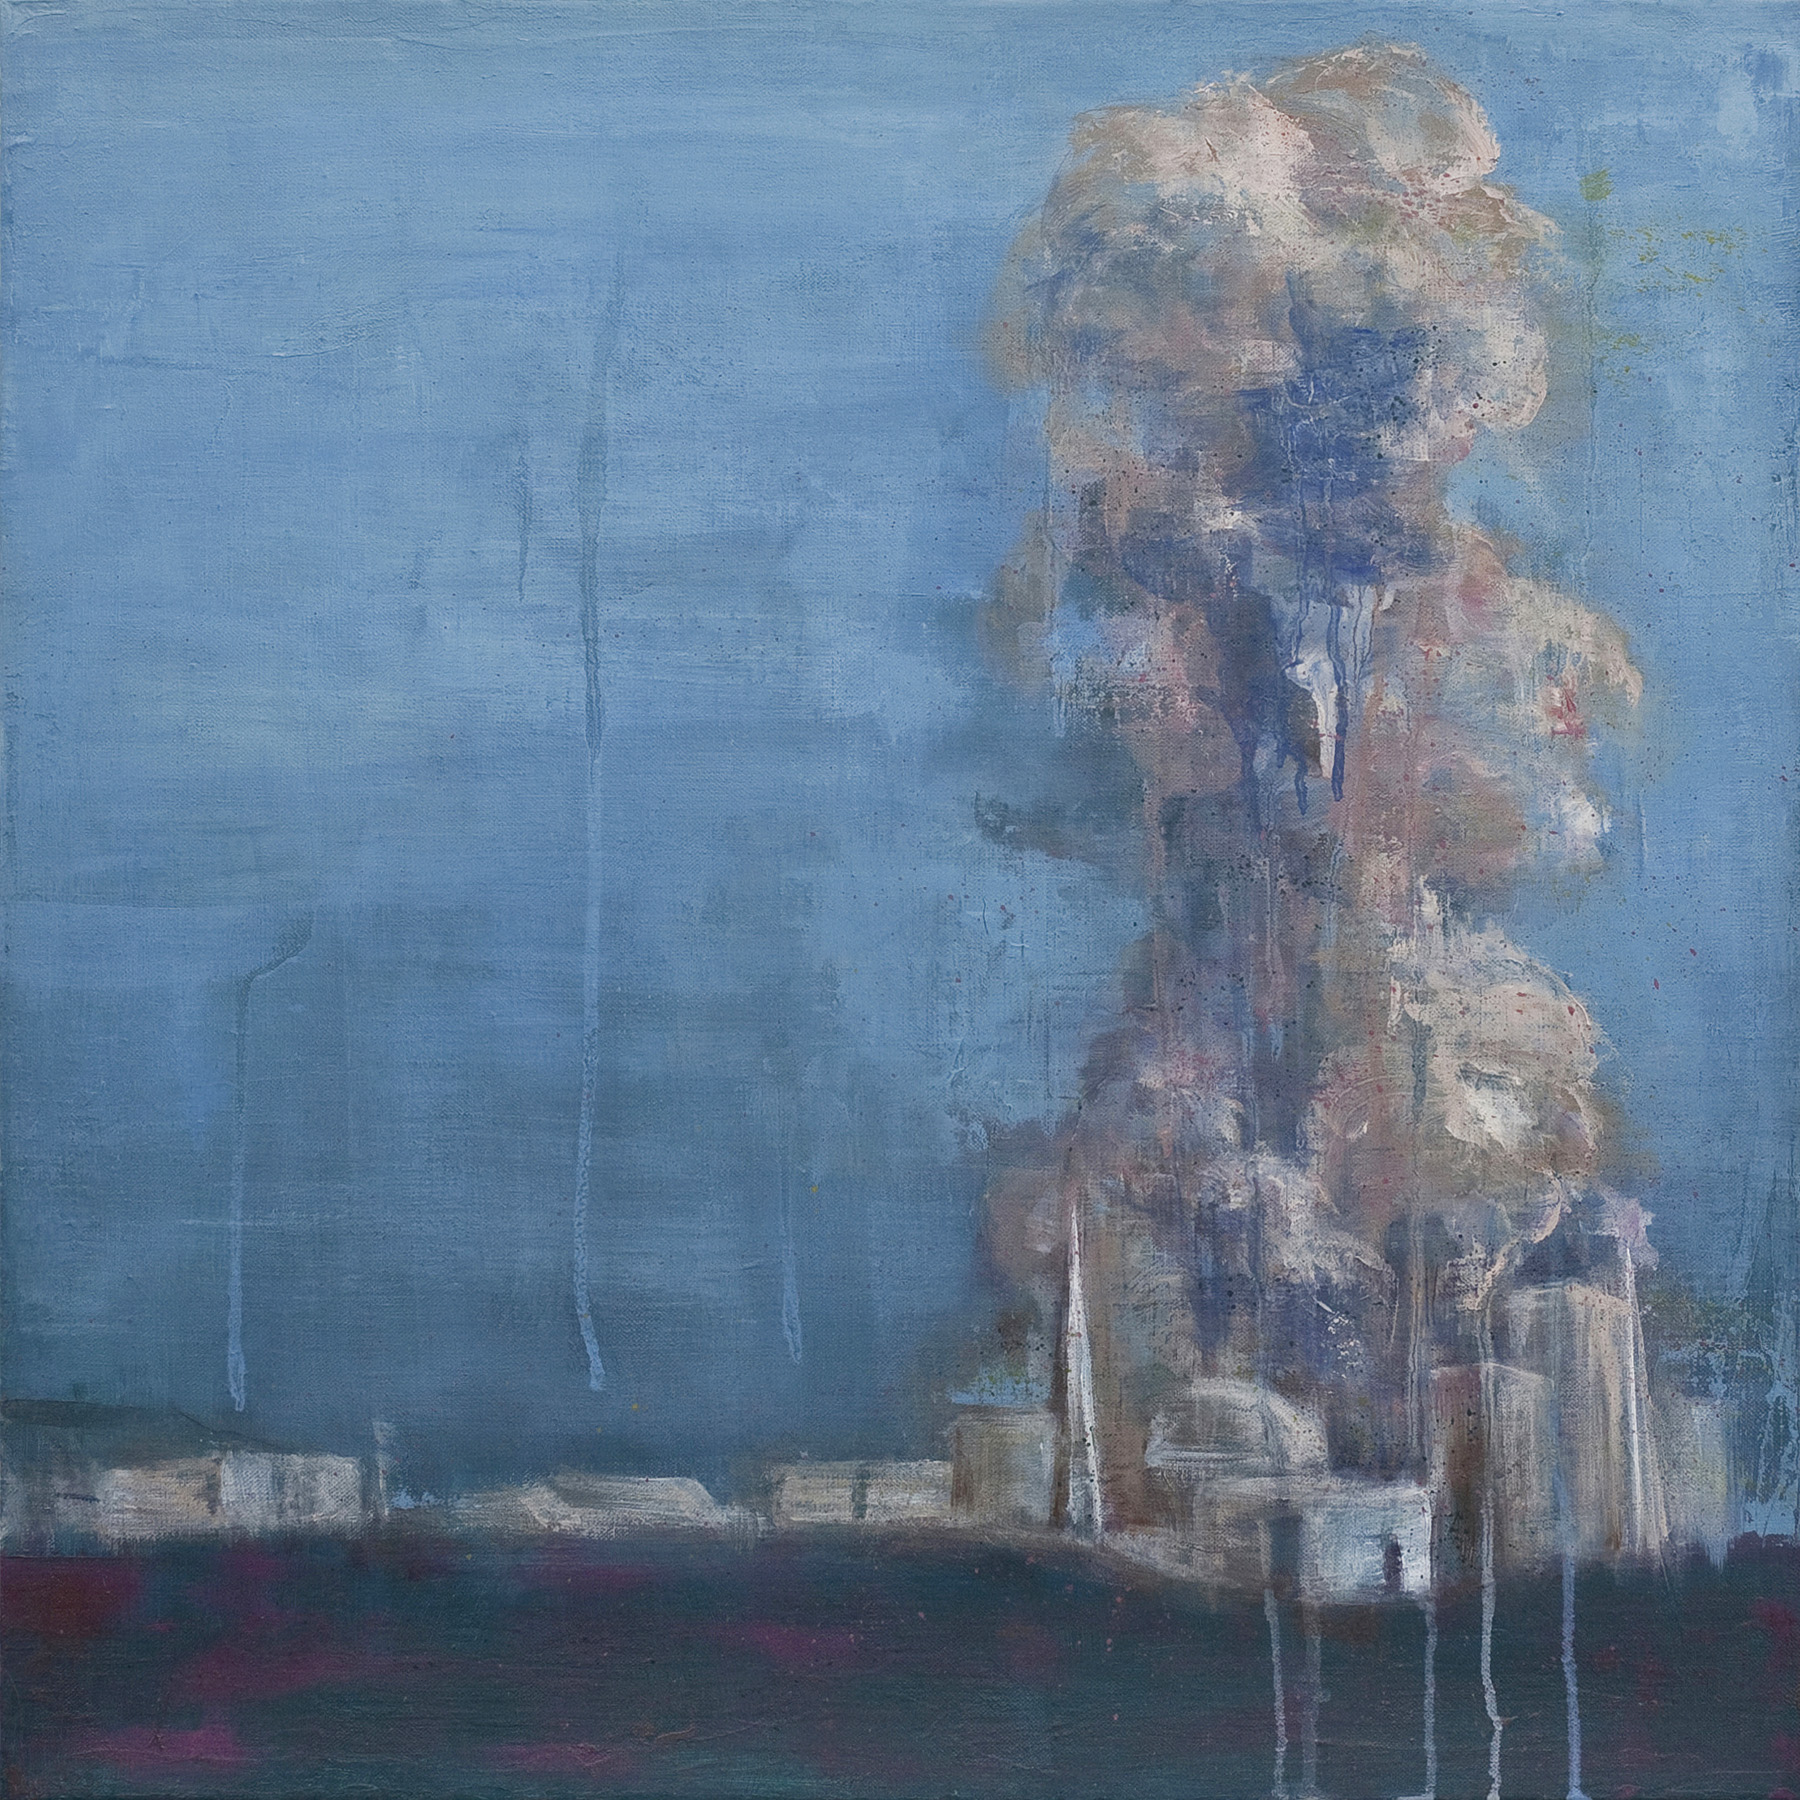   A Recurring Landscape , oil and pencil on linen, 51 x 51 cm,&nbsp;2012 